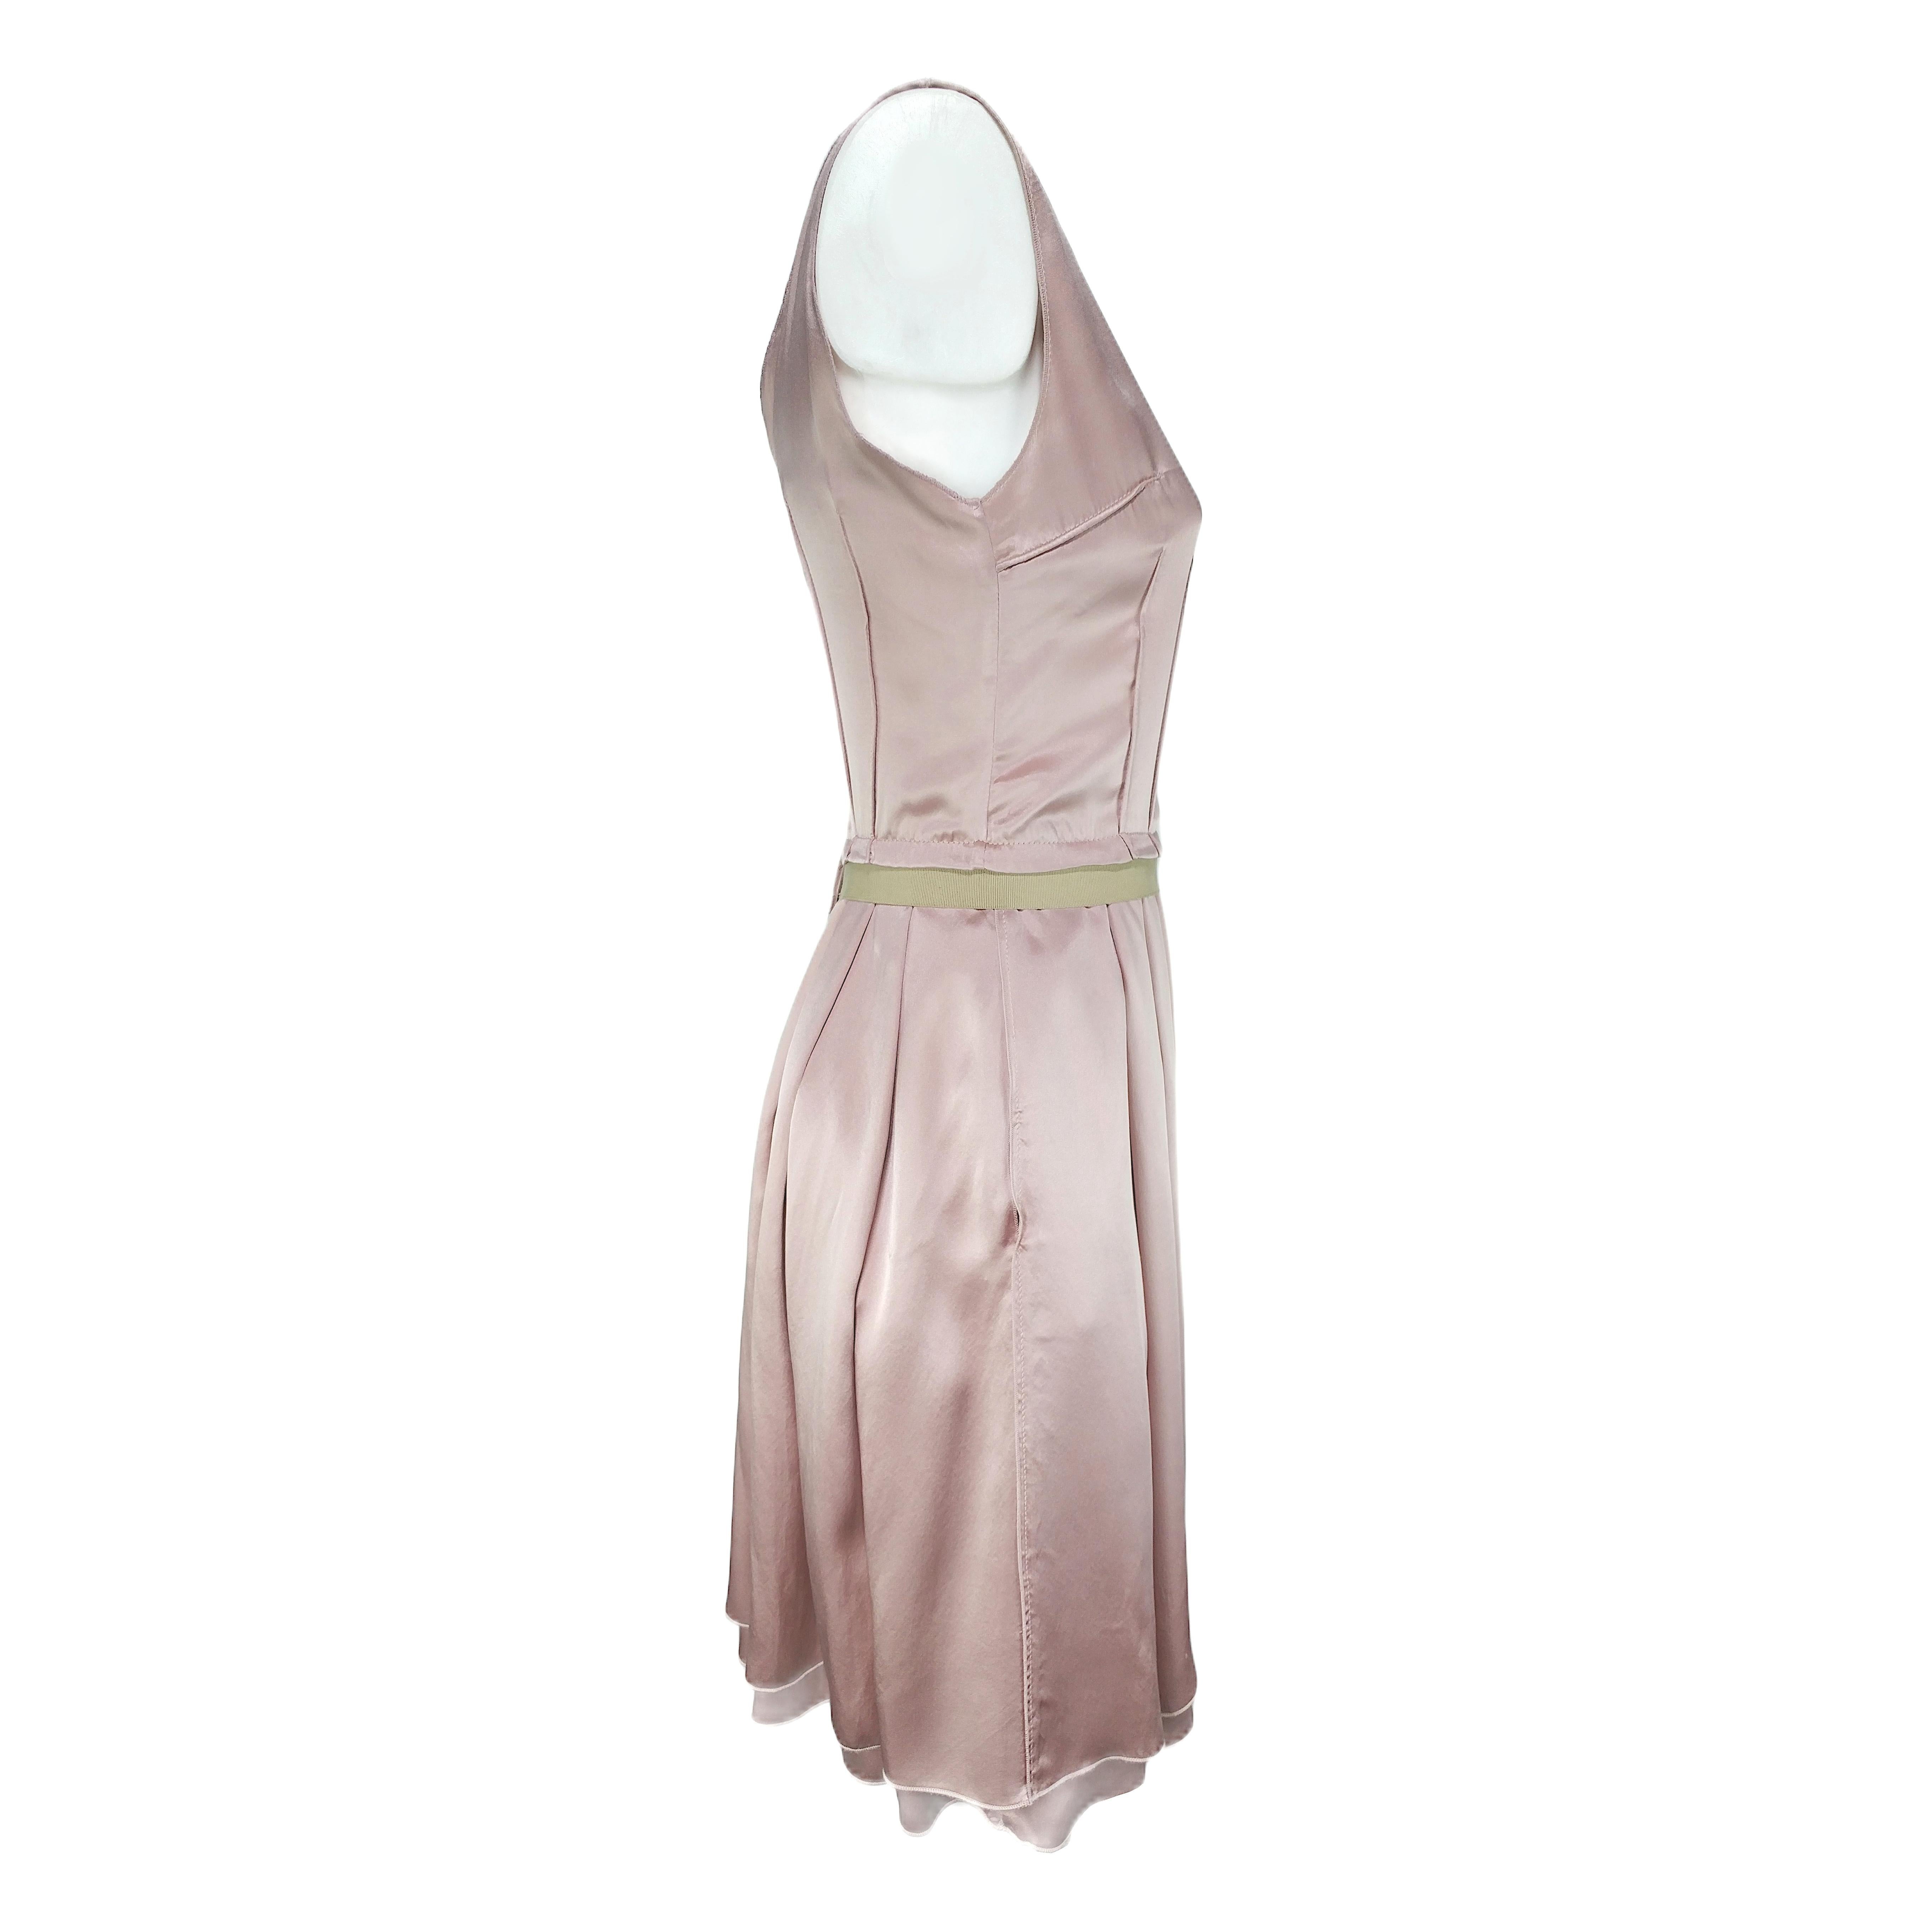 It is a pre-owned Dolce & Gabbana midi dress in pastel rose-pink, featuring a pleated half-circle skirt, a scoop neckline, two side pockets and a zip on the back side with hook-and-eye closure. The zip puller carries the Dolce&Gabbana logo and the